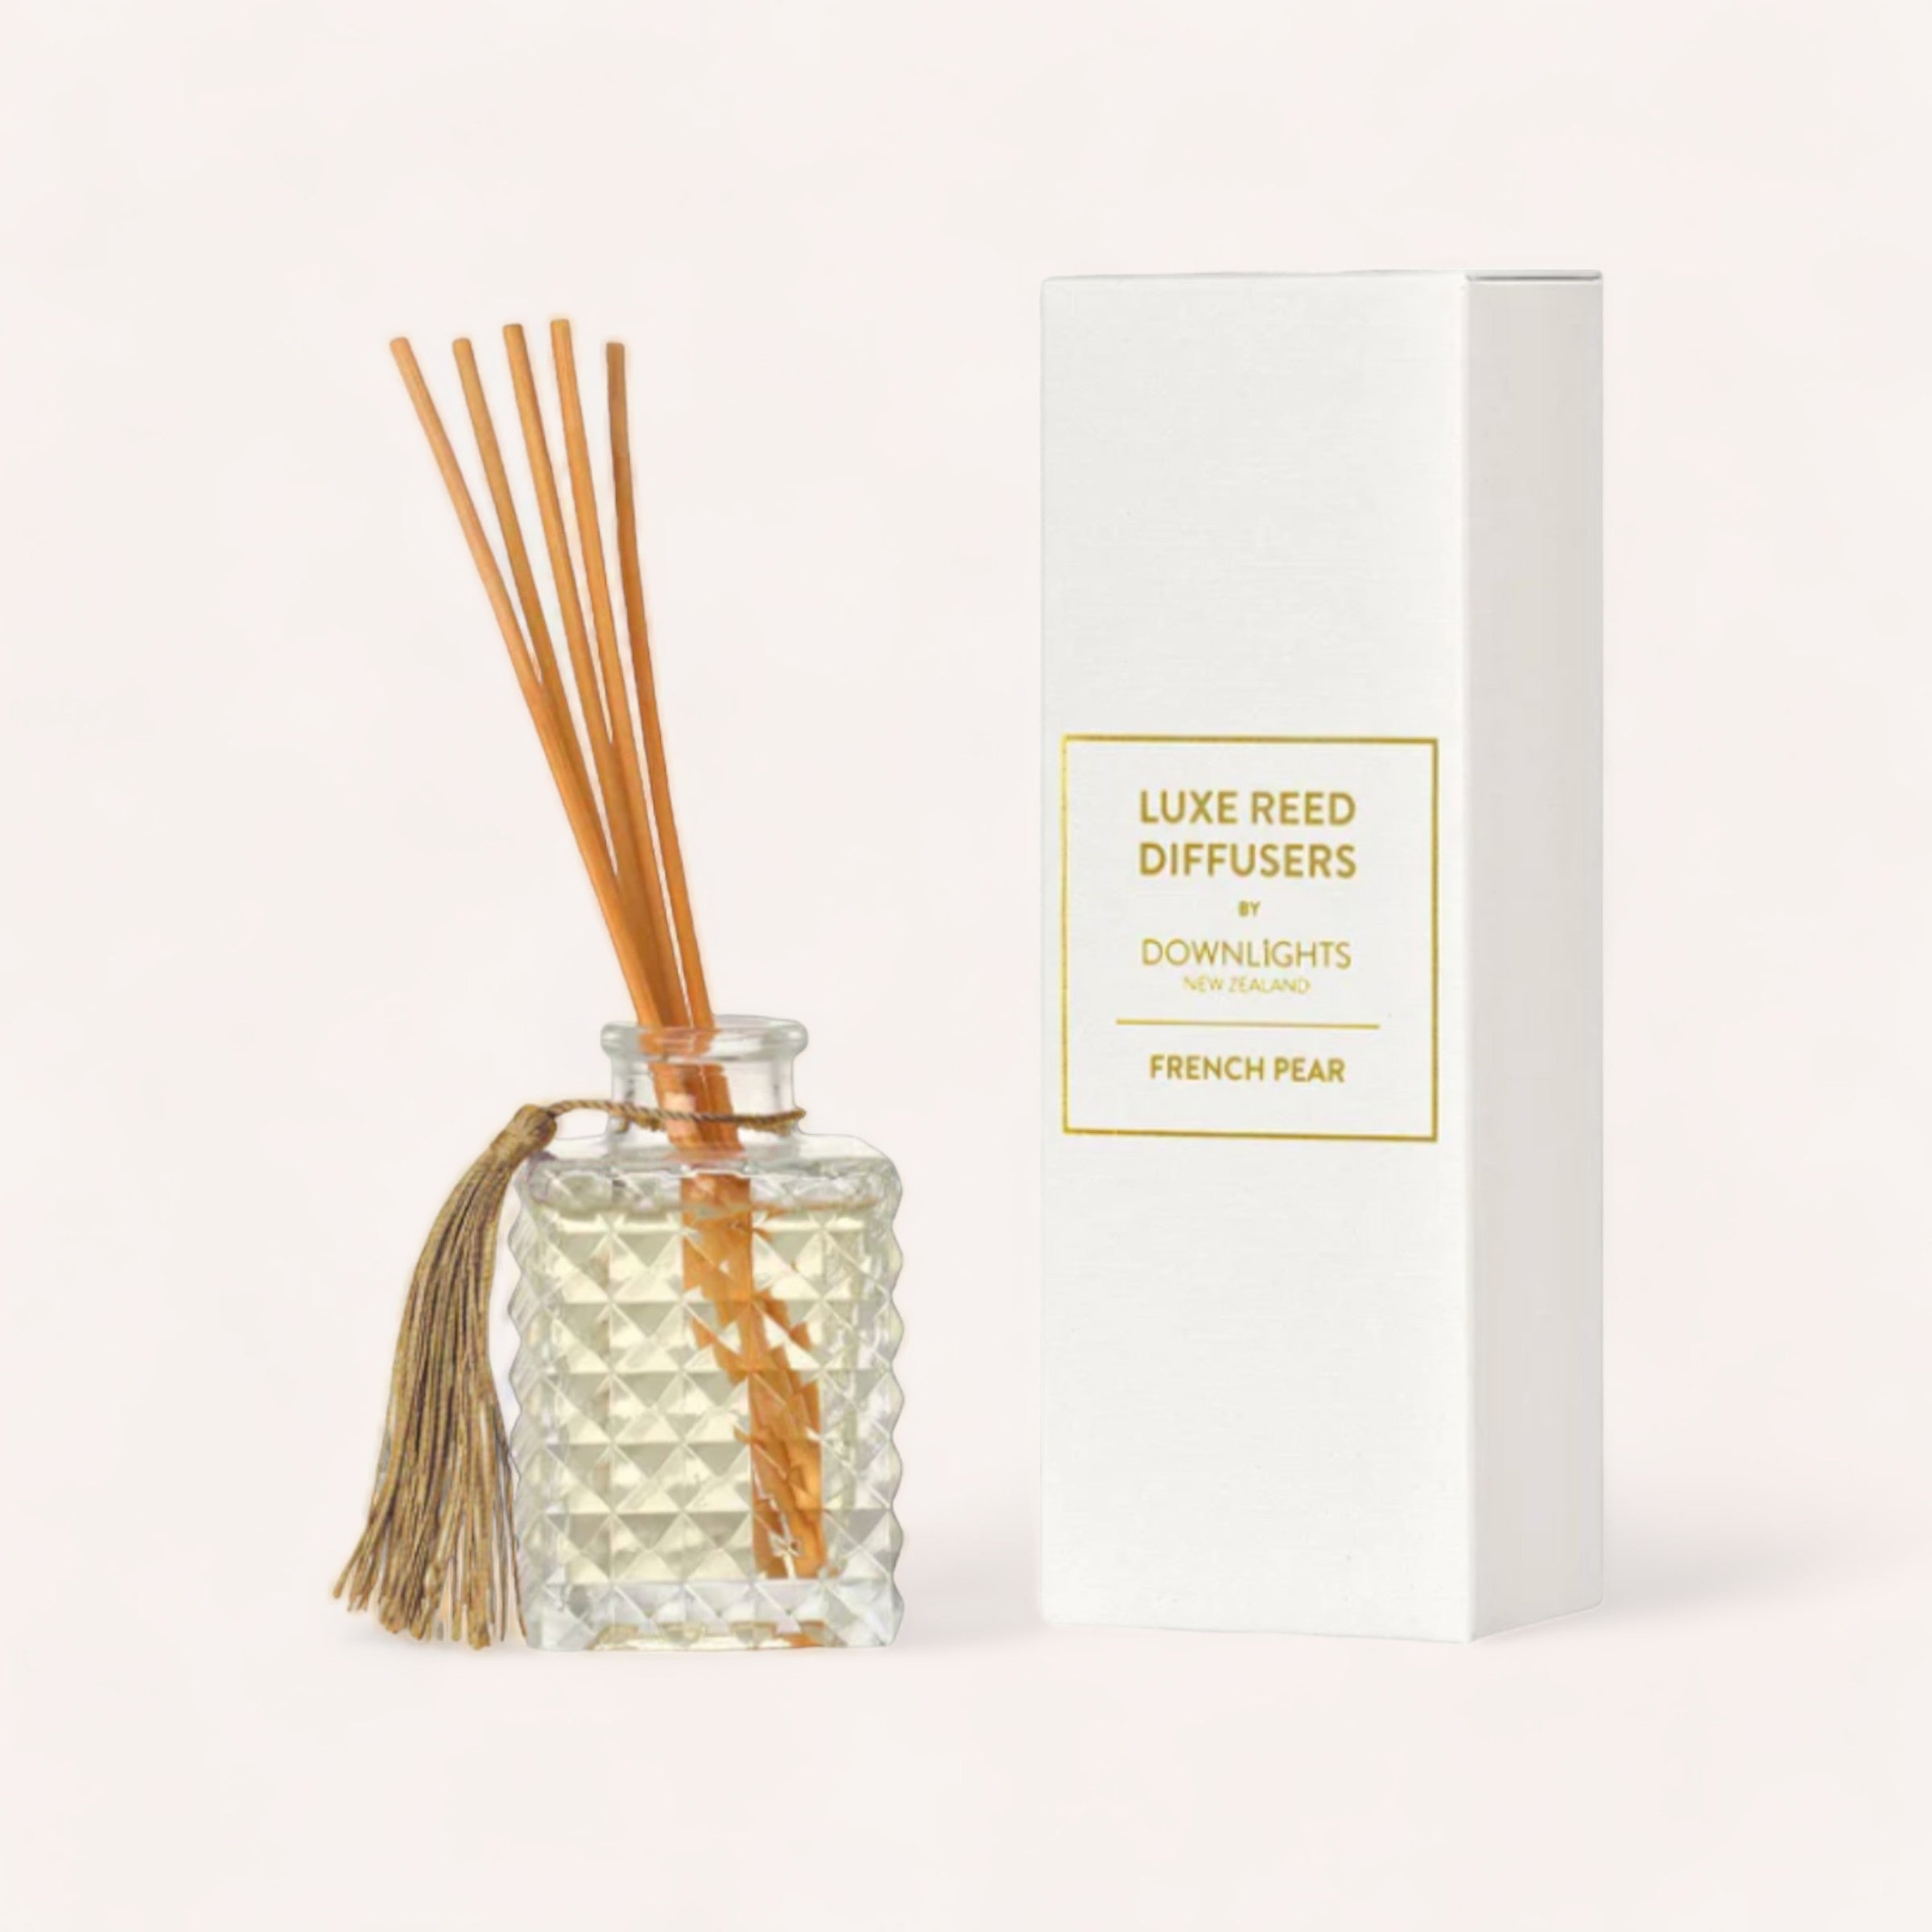 Elegant glass French Pear Diffuser by Downlights with a golden label accompanied by its packaging box, set against a neutral background, emitting a brandied sweet French pear scent.